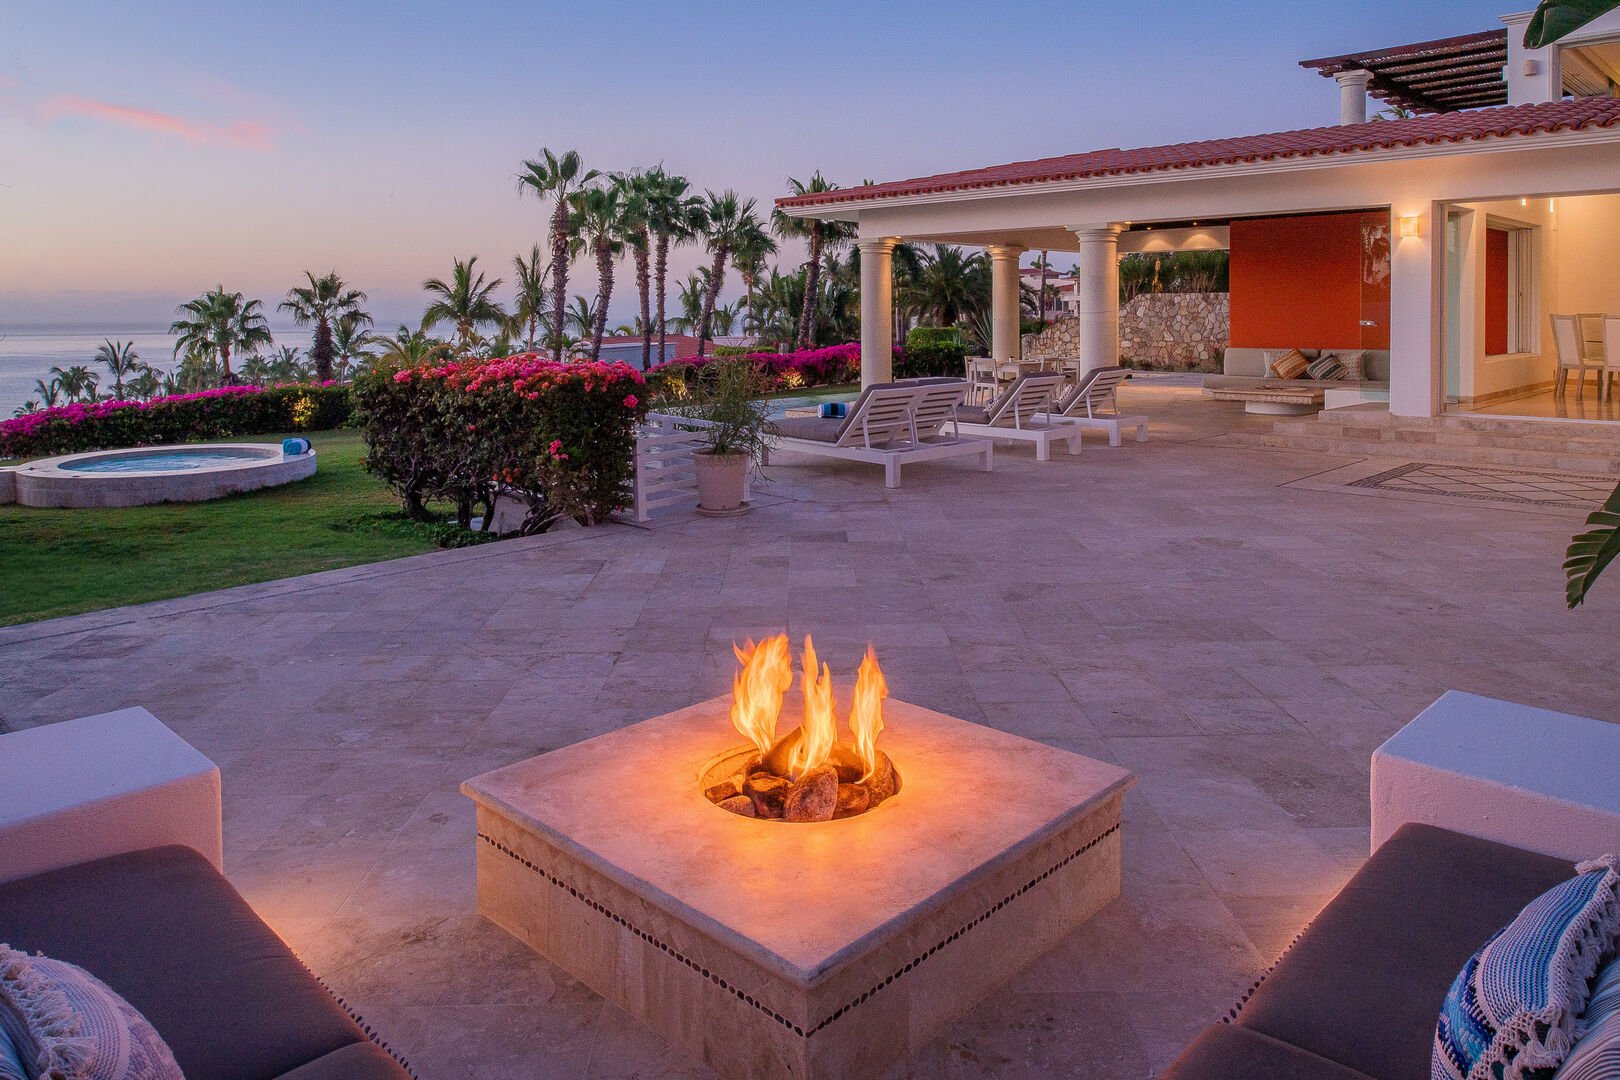 An outdoor seating area with a small firepit.